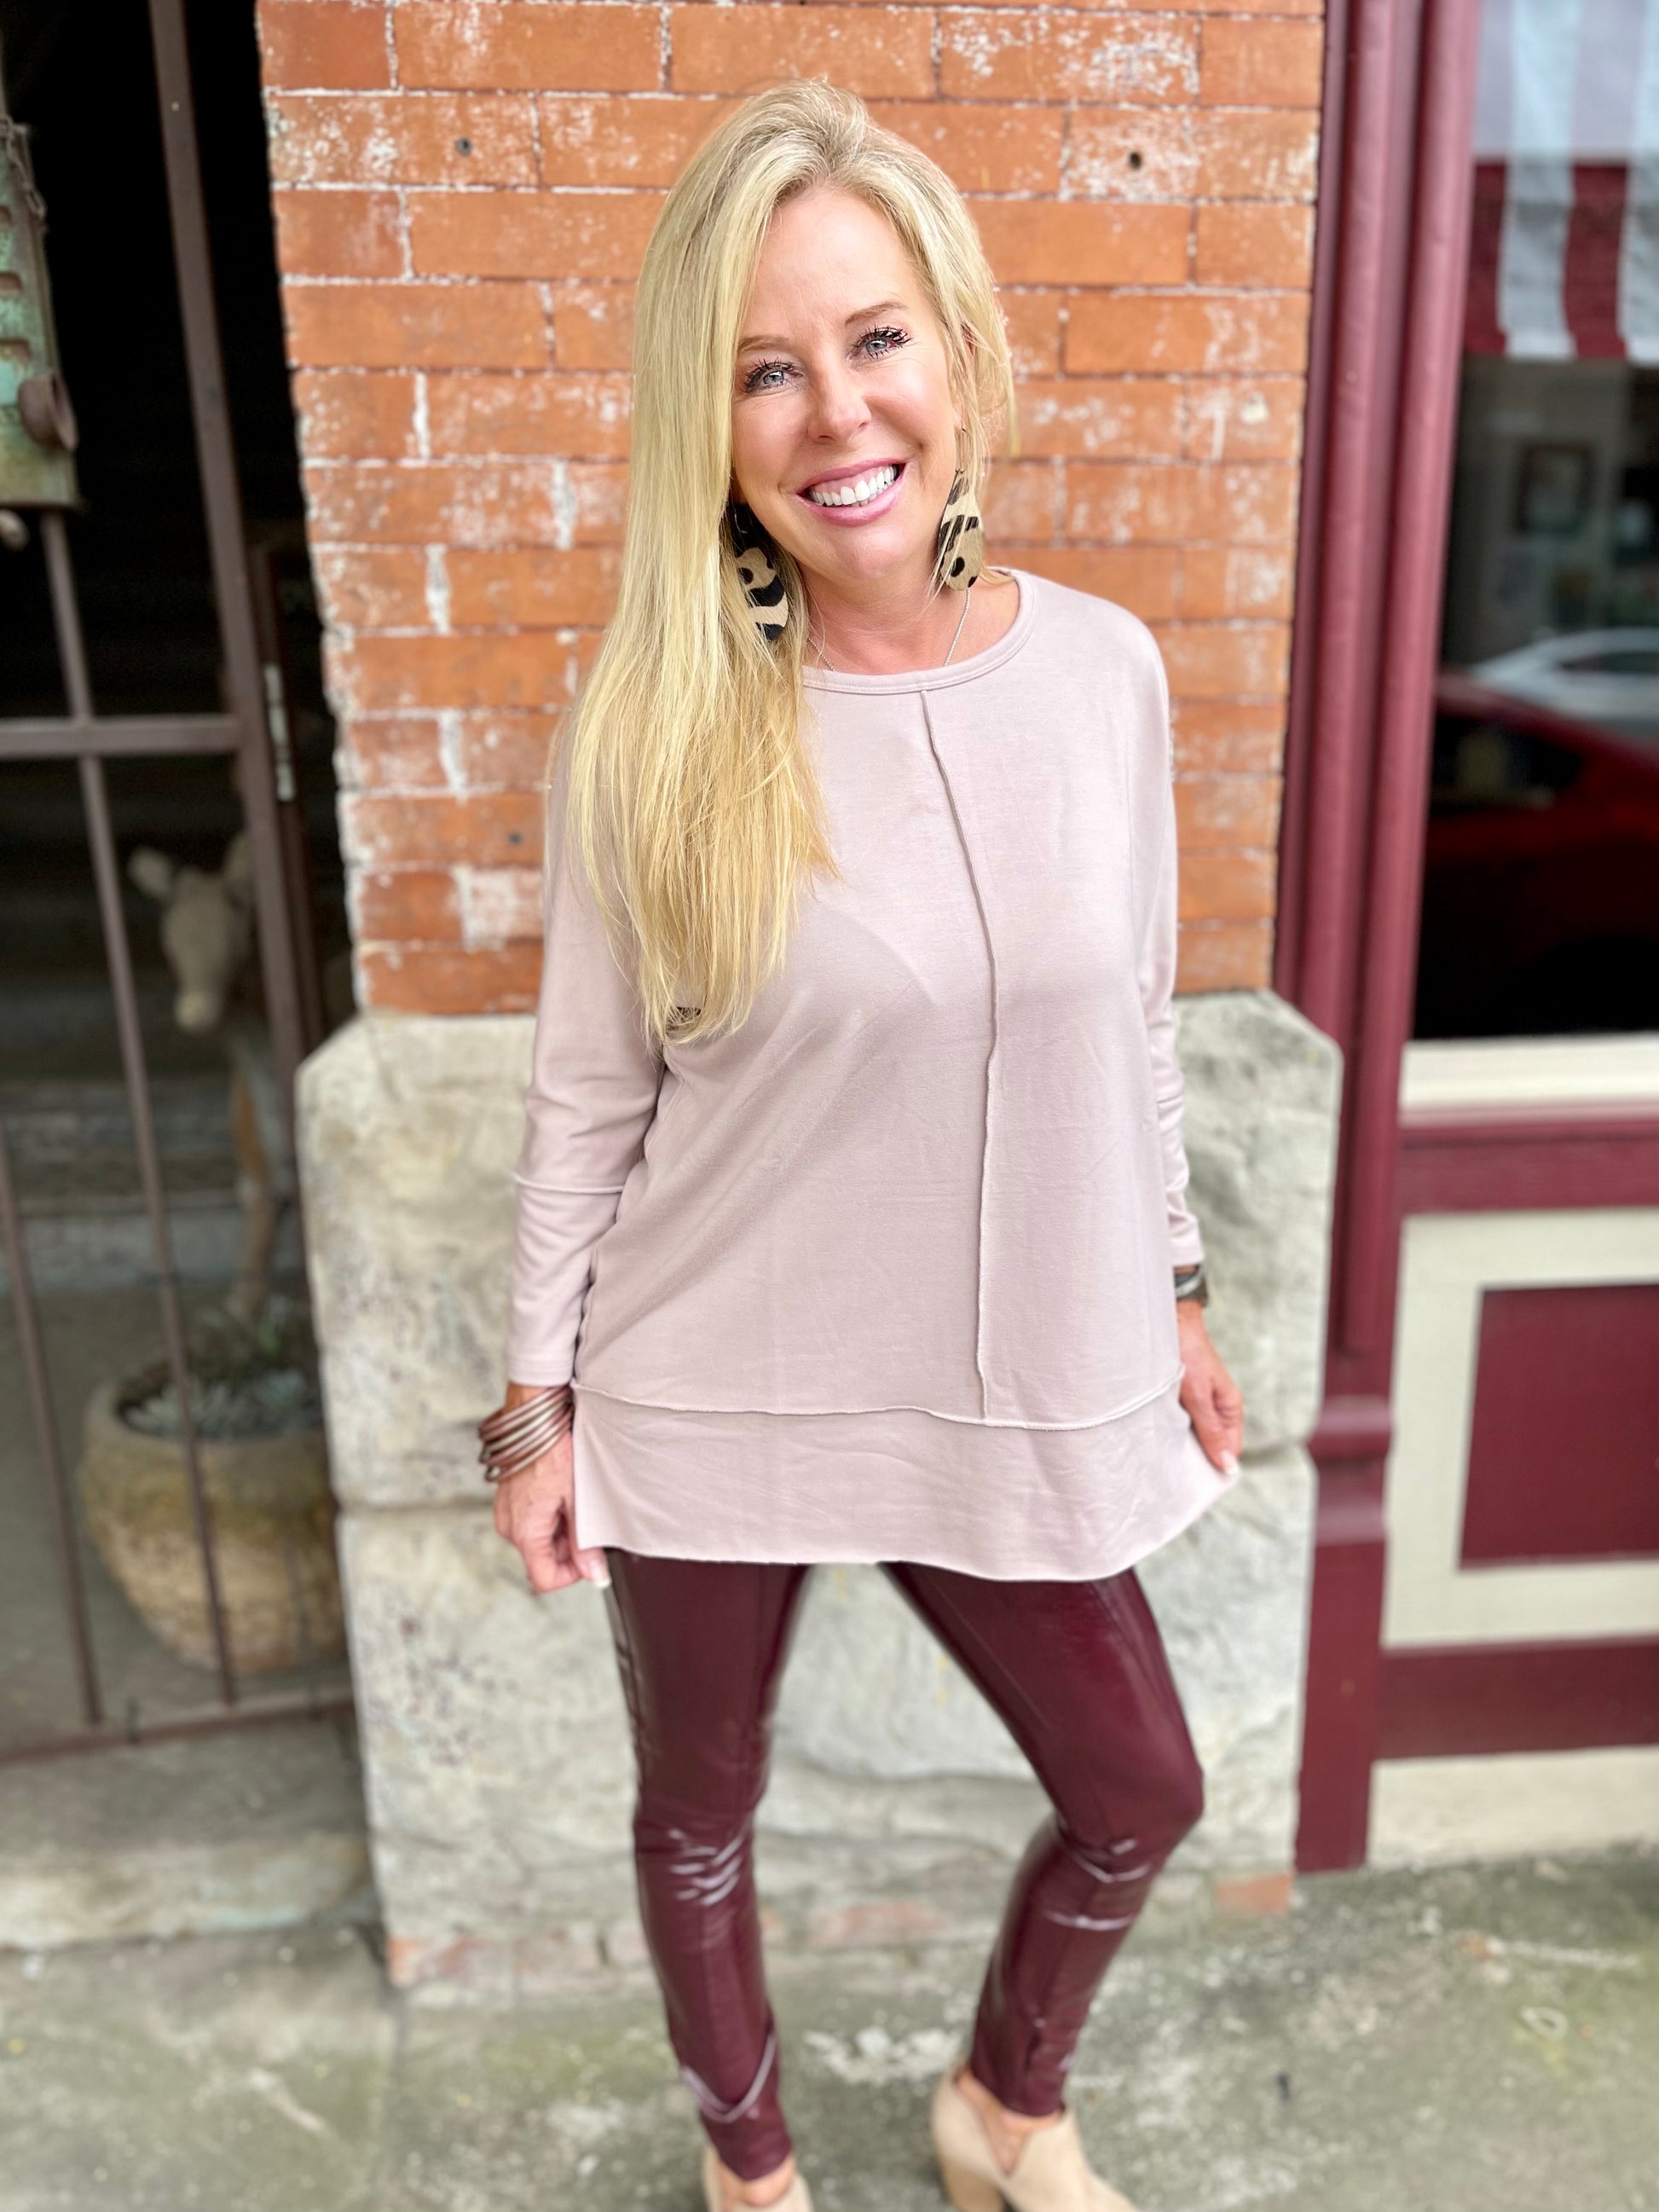 SPANX - Your Favorite Leggings Now in Wine! Check out our best